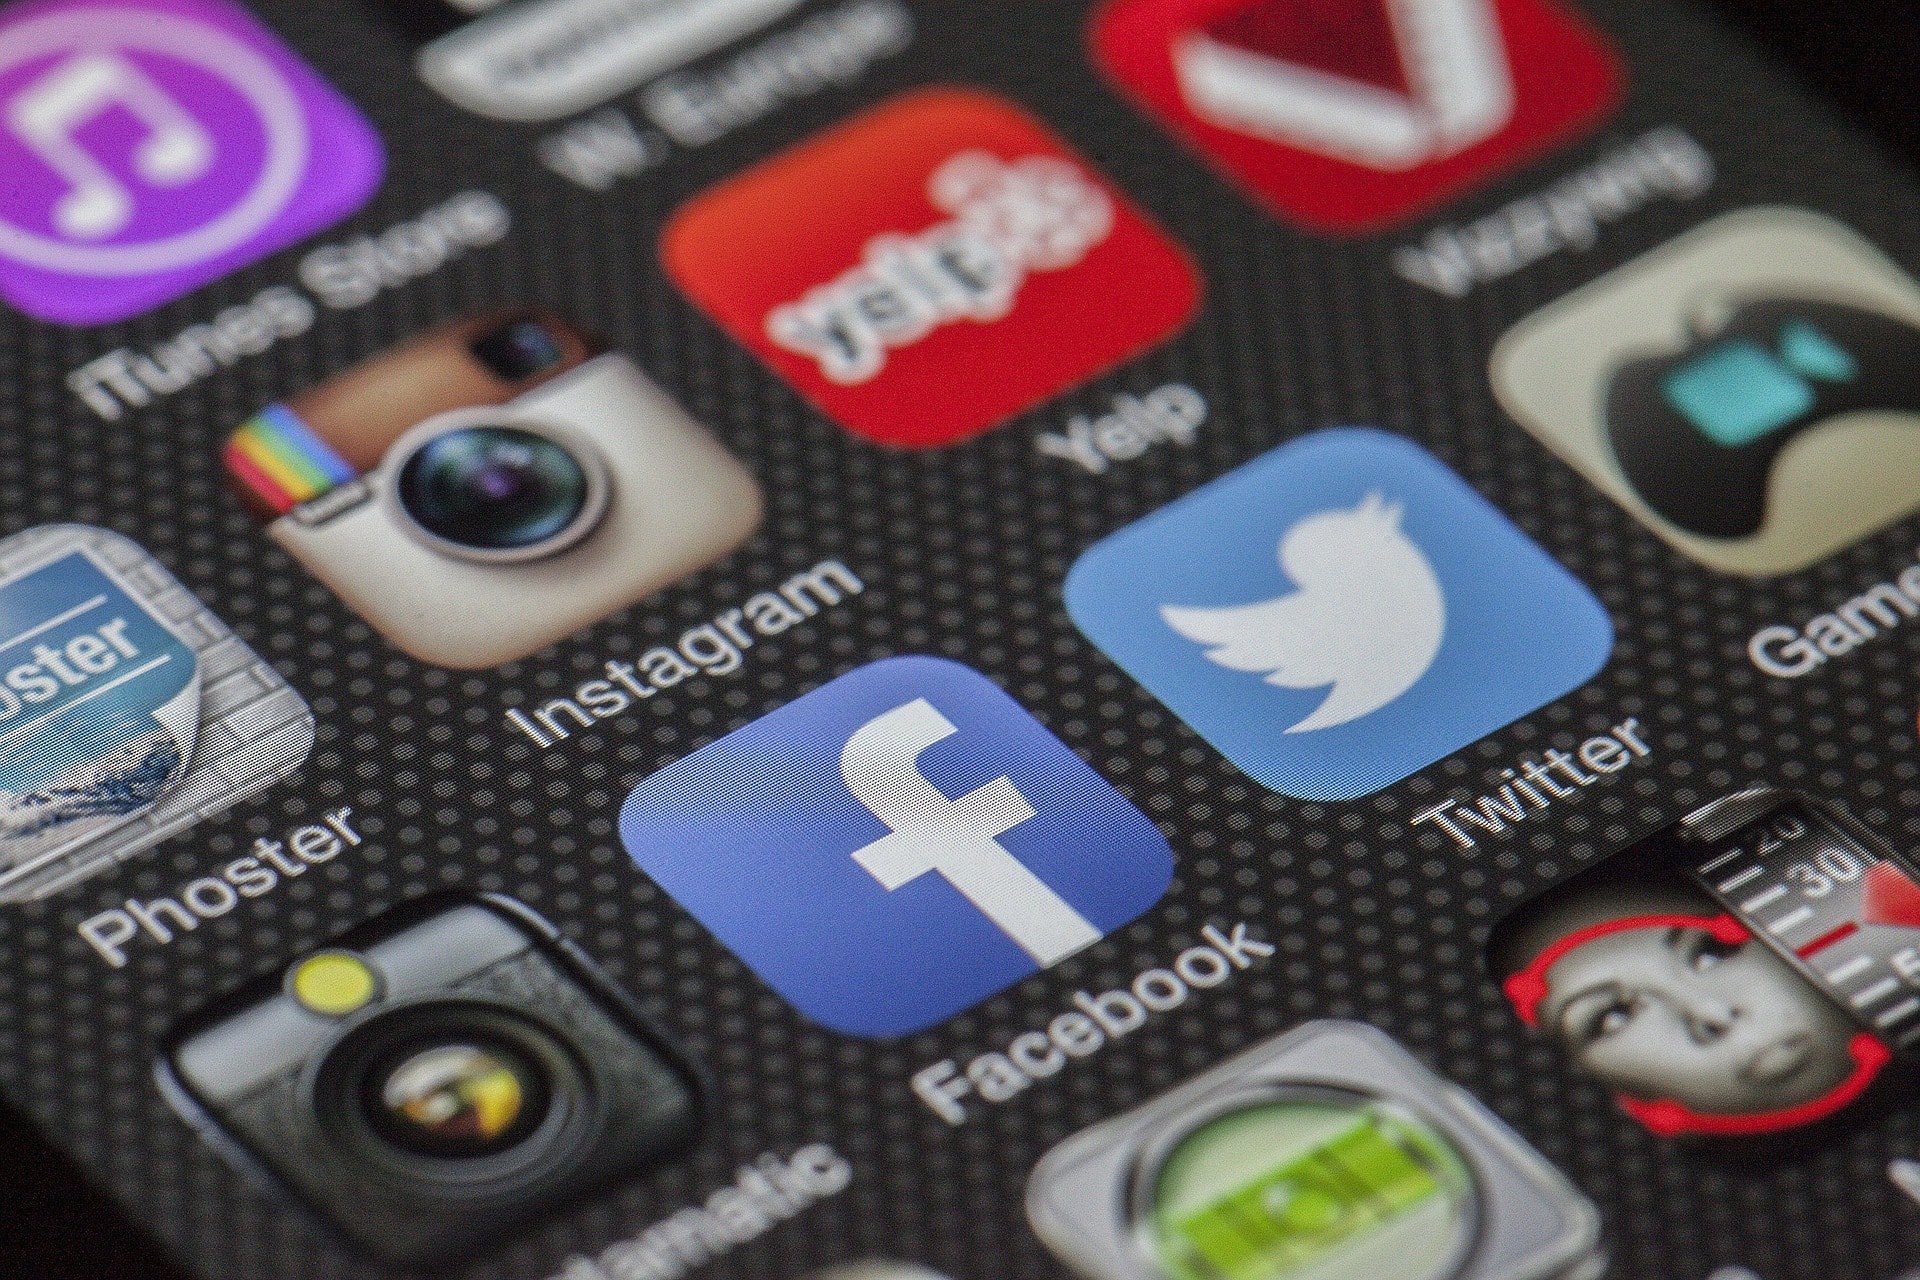 Do Employers Actually Look at Your Social Media Profiles? What Do They Look For?